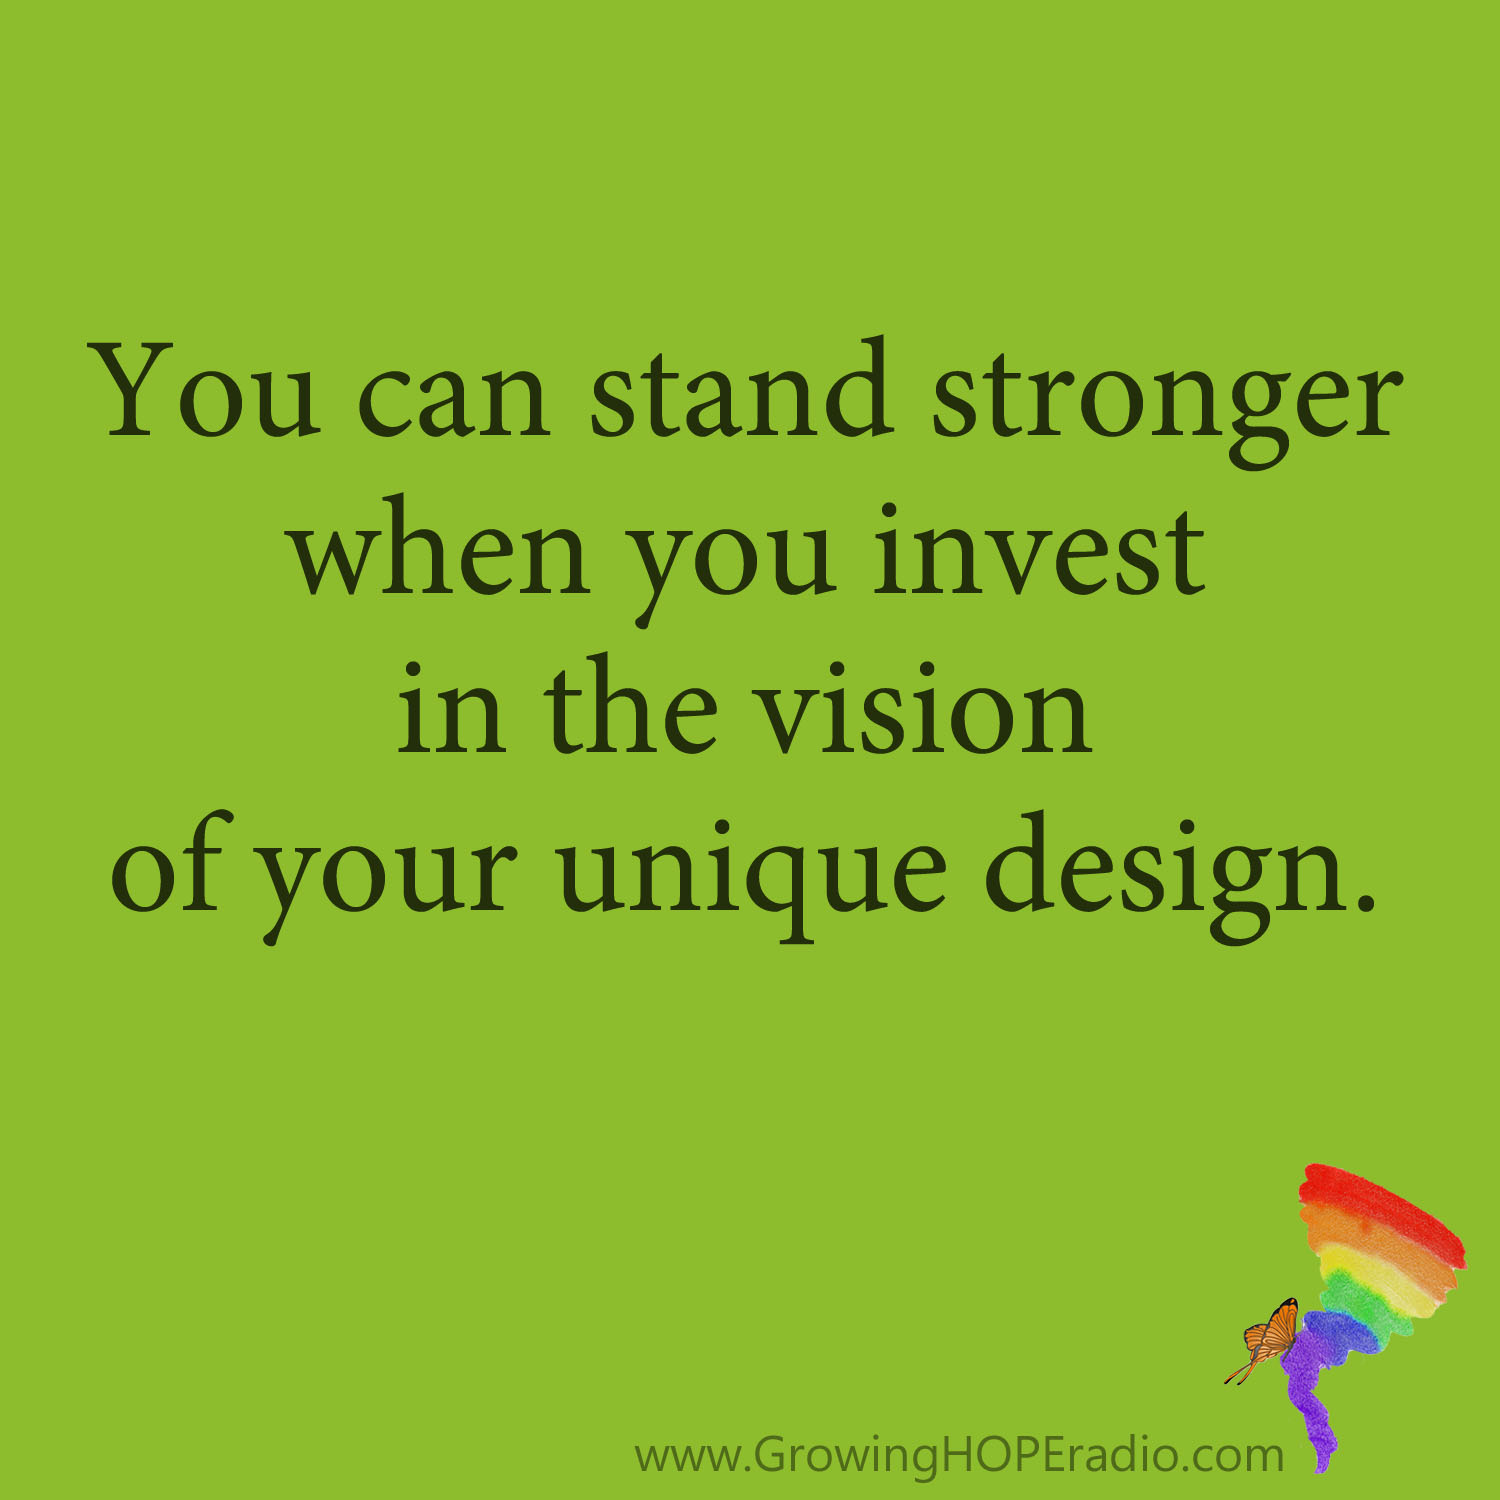 Growing HOPE Daily - Quote - Stand Stronger in Unique Design